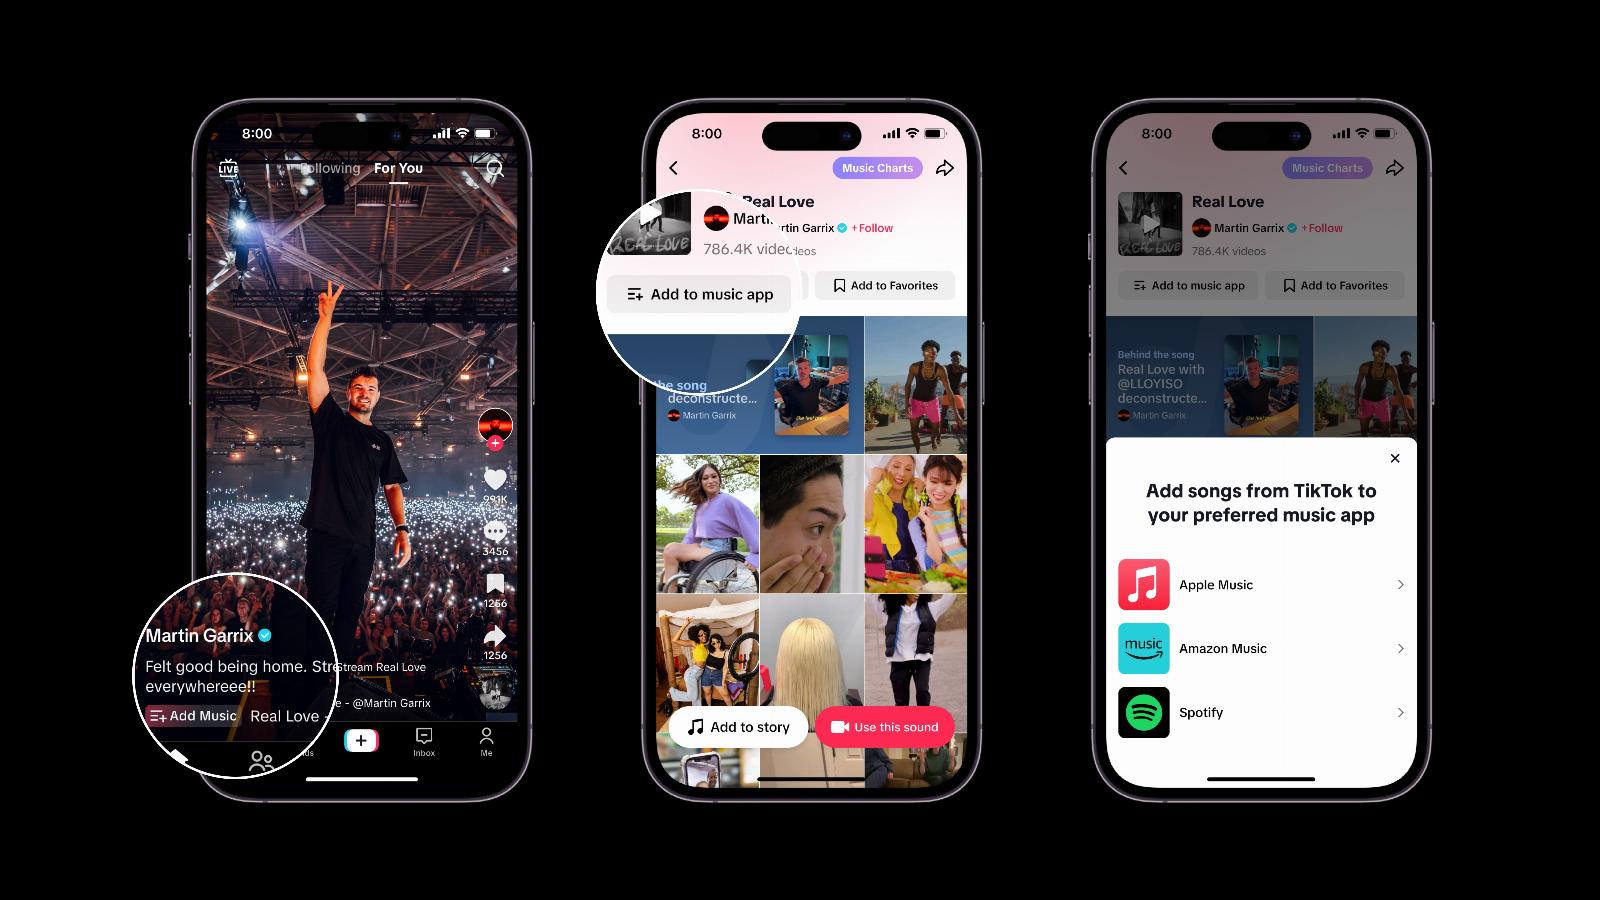 TikTok launches its ‘Add to Music app’ feature available in over 160 countries